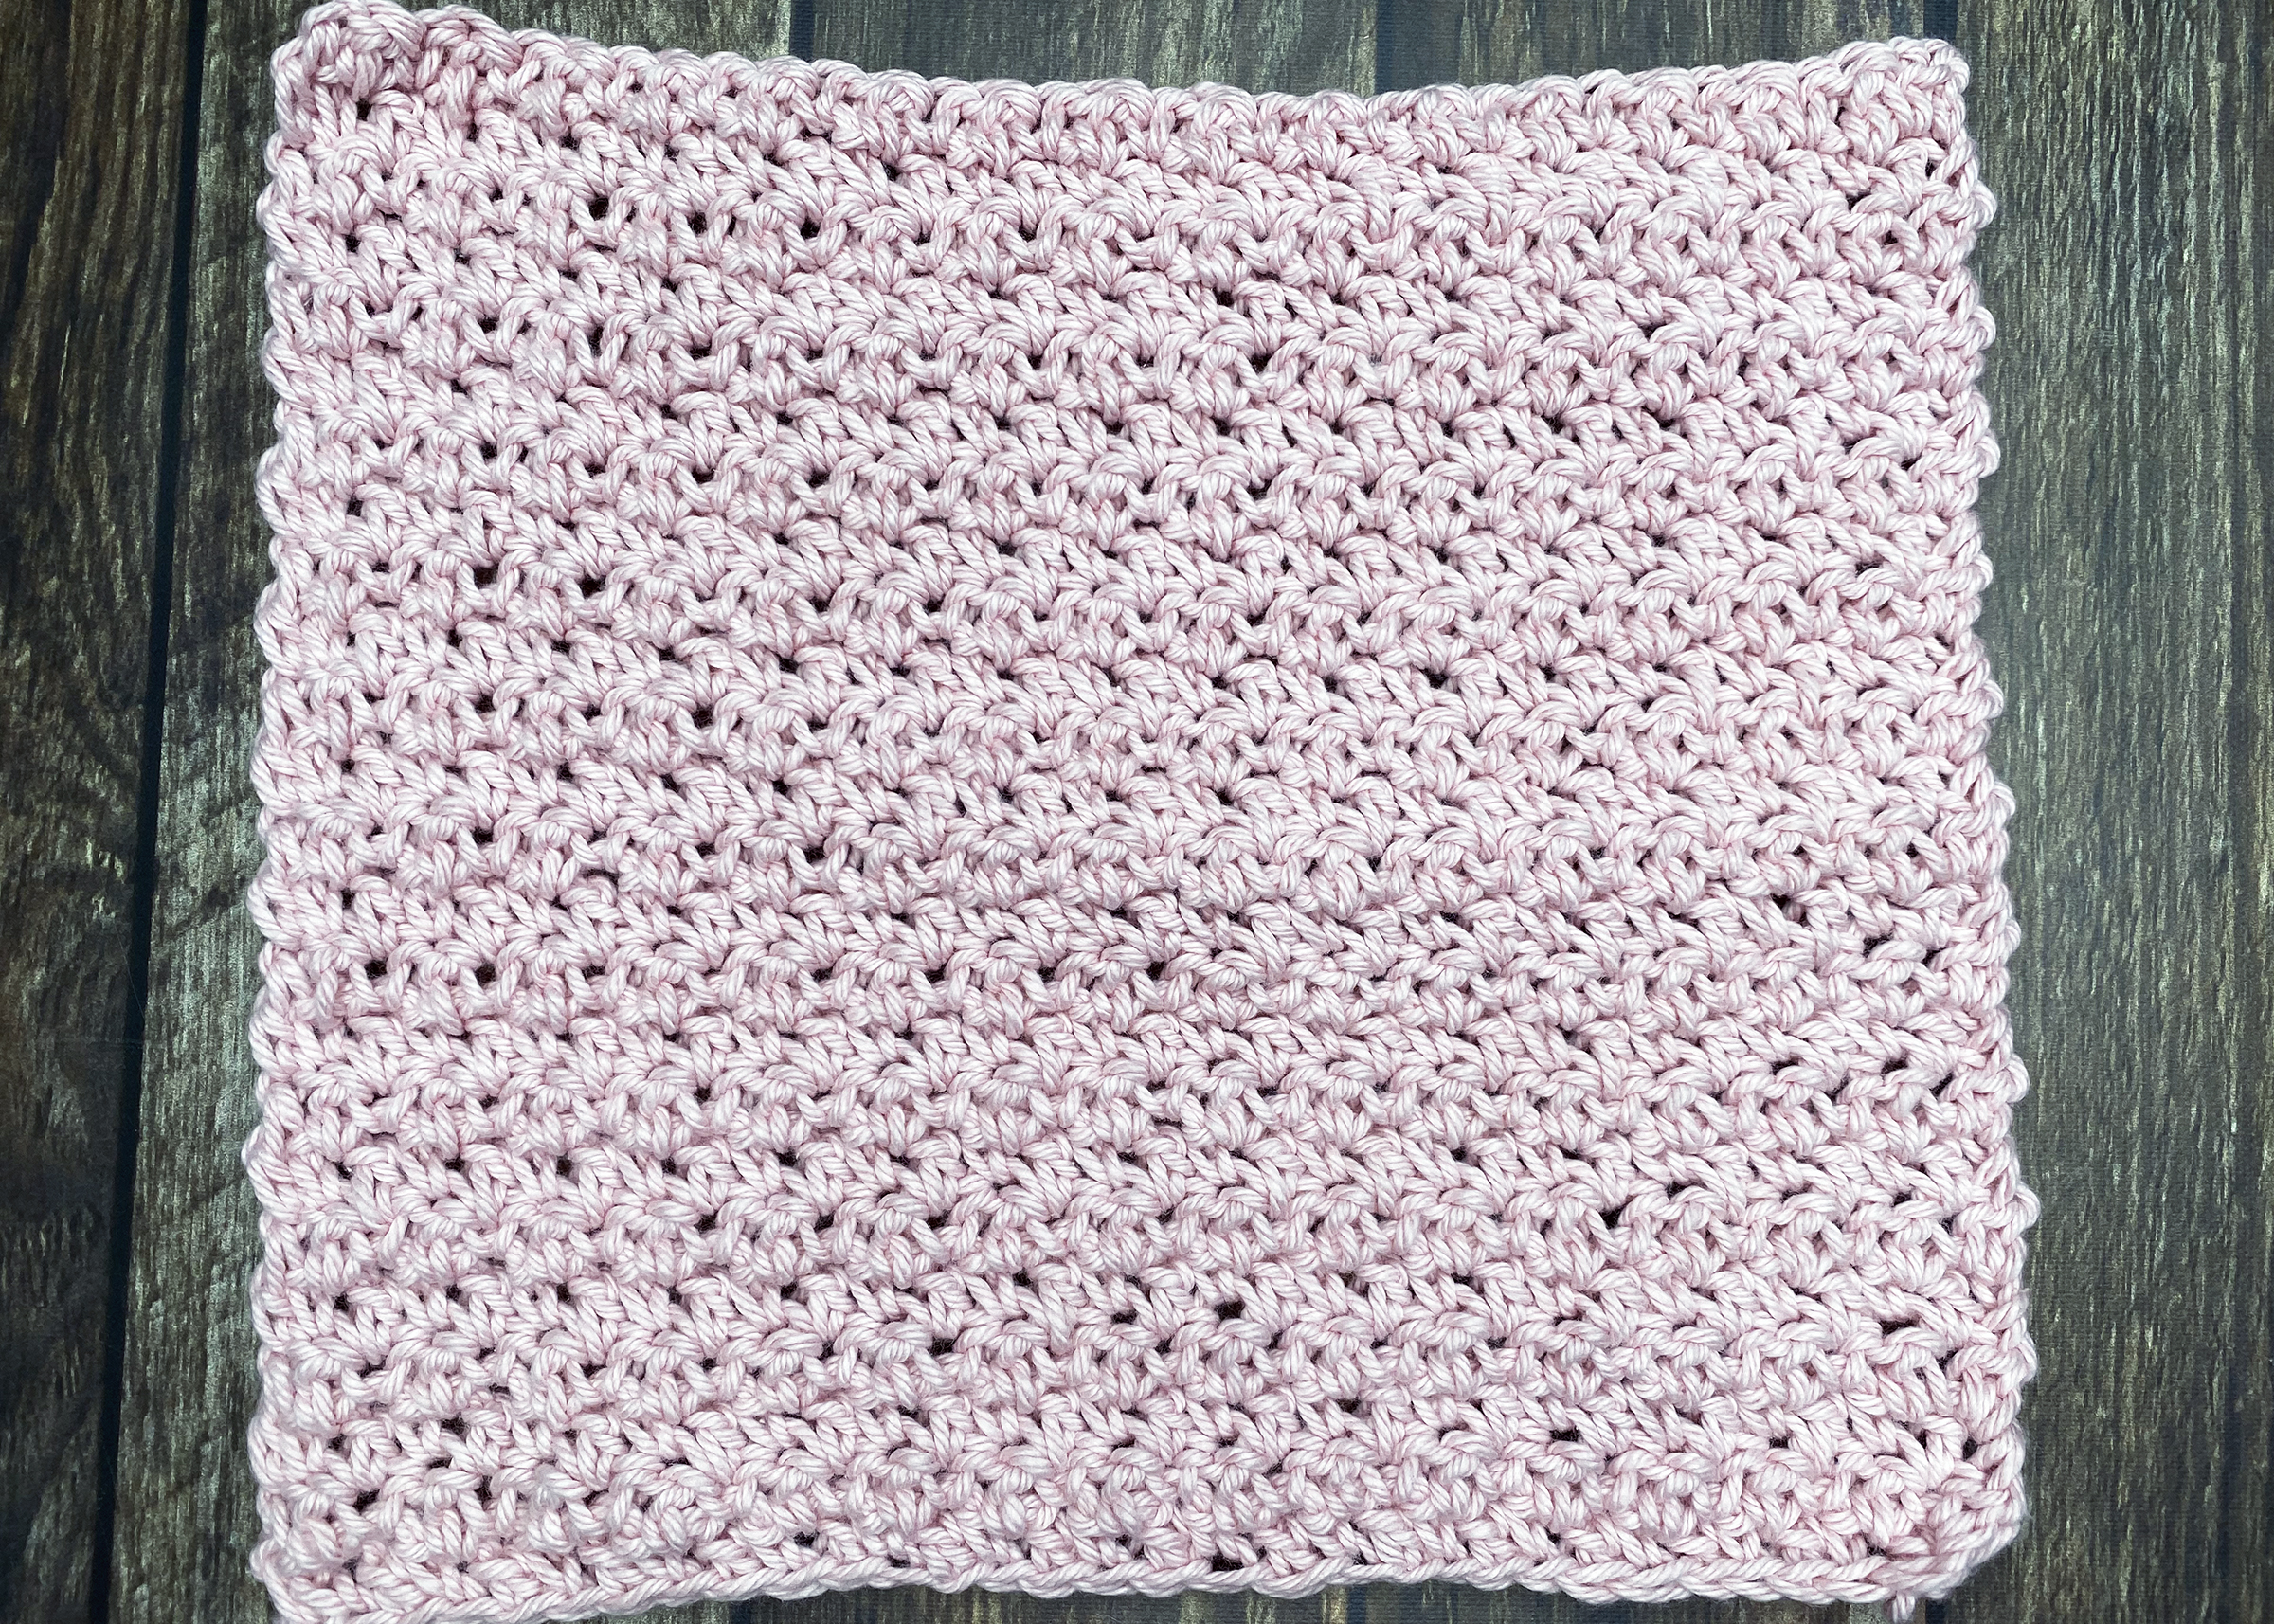 close up image of a pink crocheted square